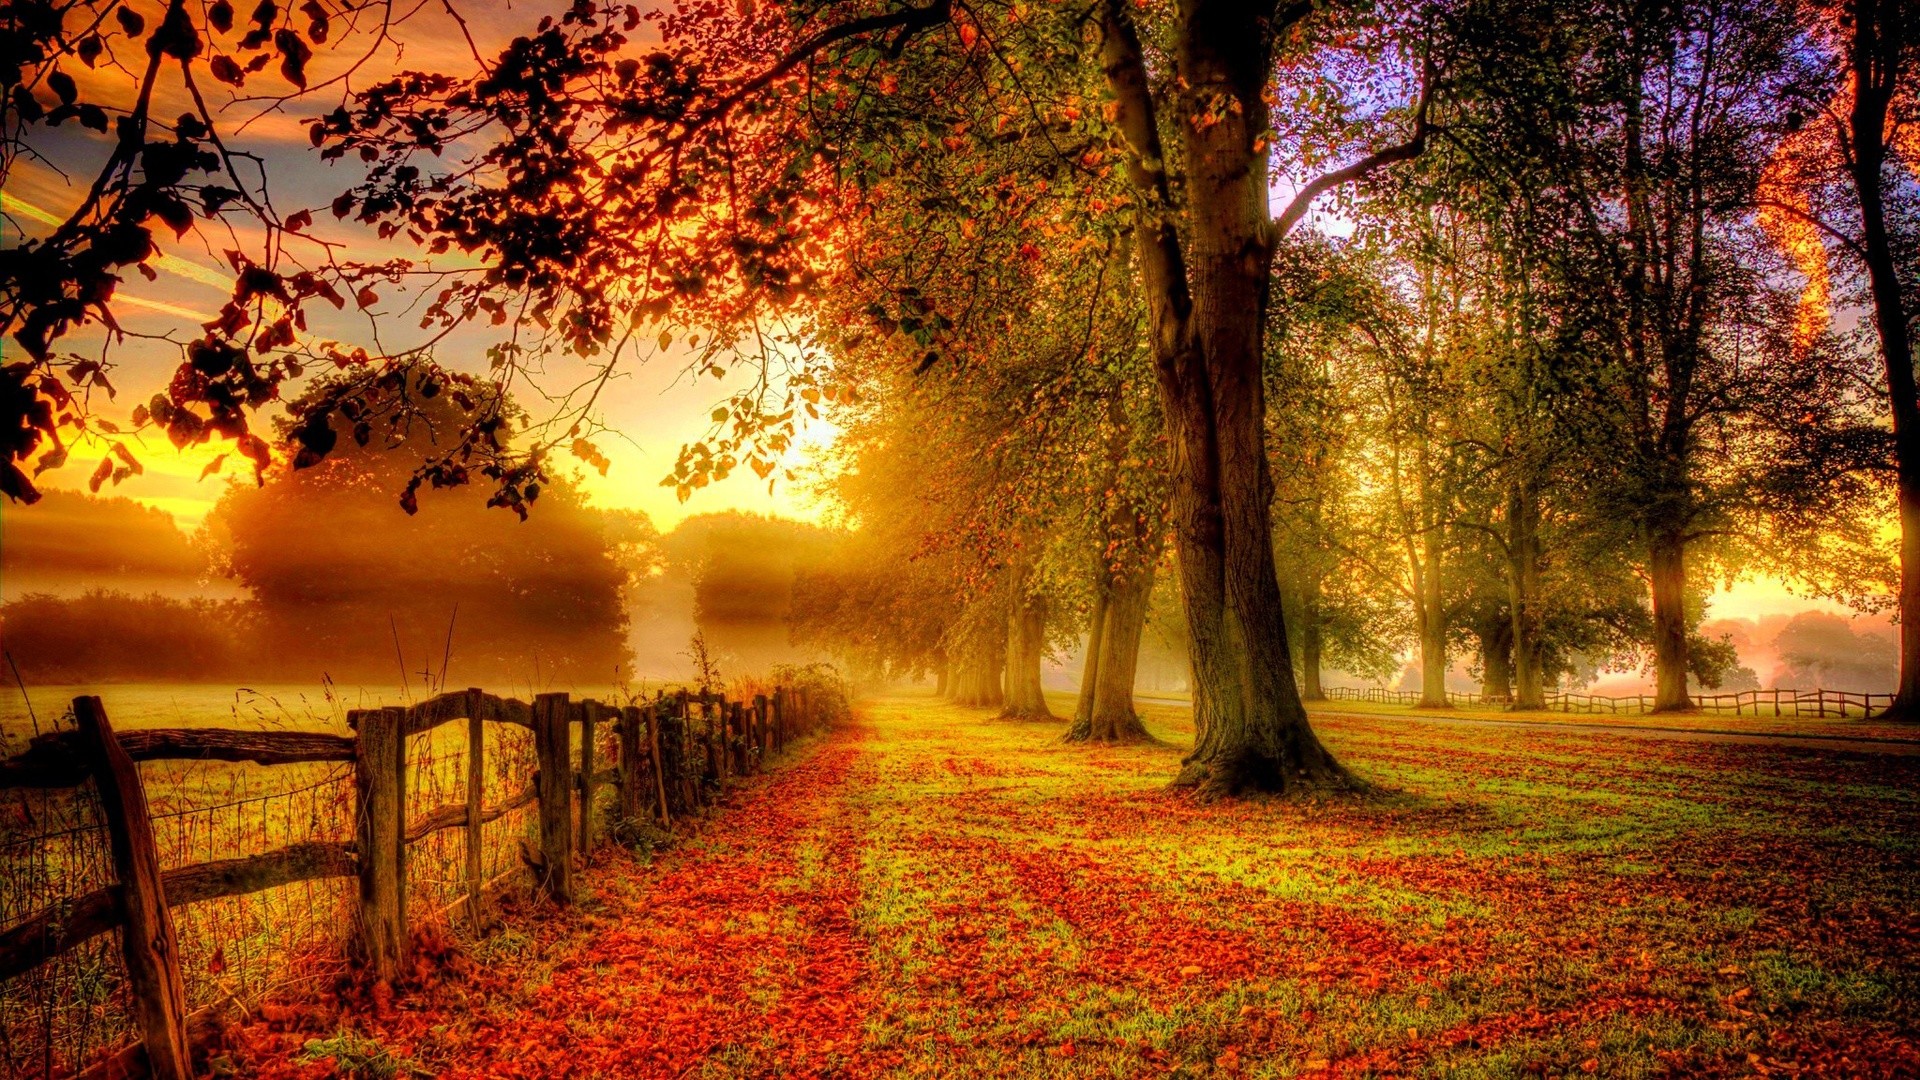 Autumn scenery red leaves road fence Wallpaper, Desktop Wallpapers